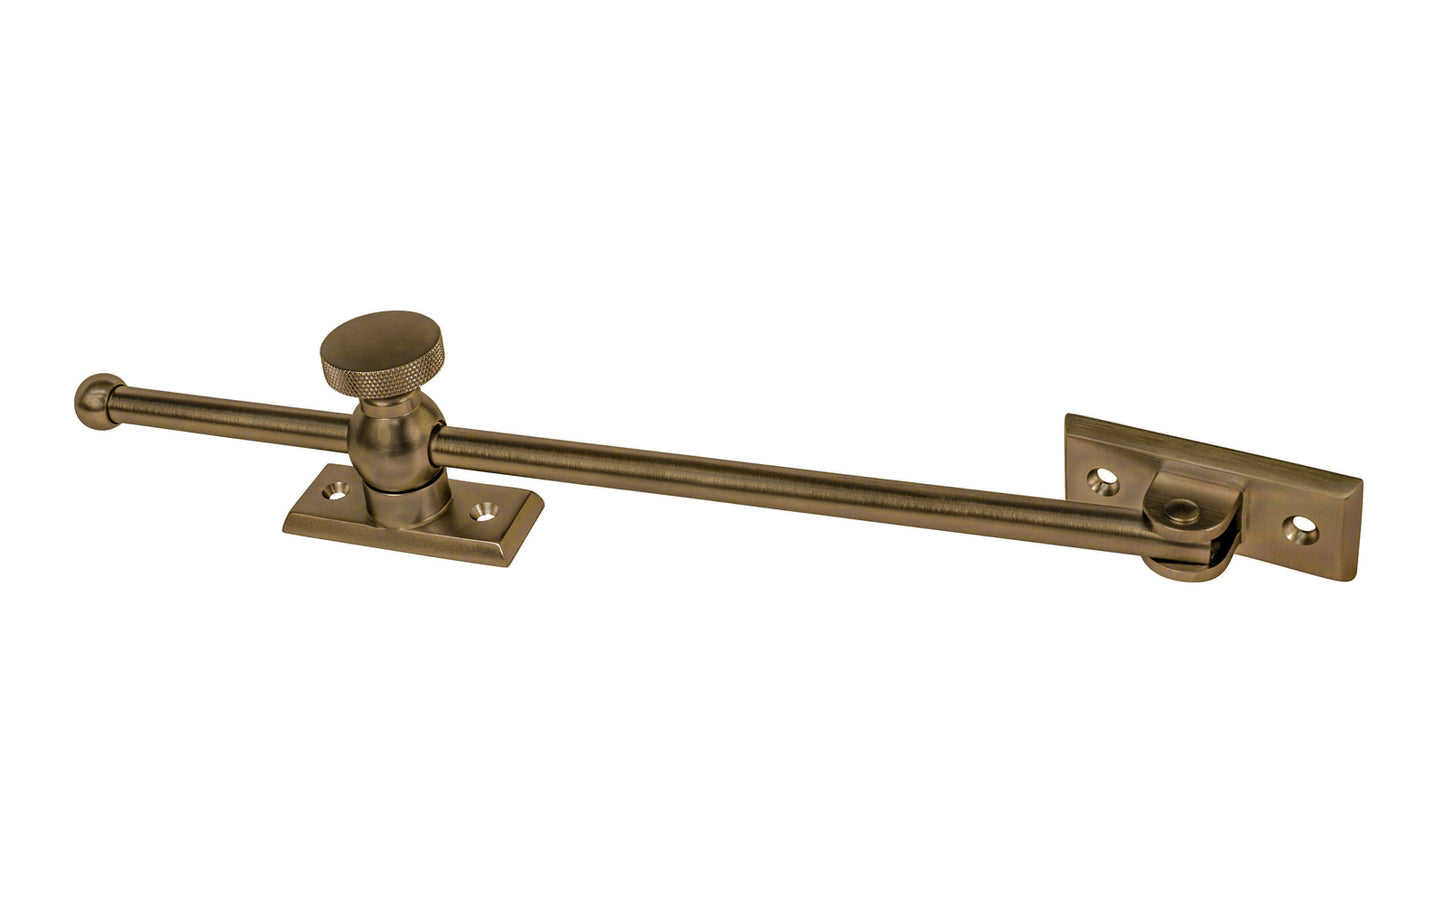 Vintage-style Classic & Premium Solid Brass Casement Adjuster Stay ~ 12" Length. For securing outswing casement windows. It has a durable pivot turn with a knurled knob for smooth & secure operation. Antique Brass Finish